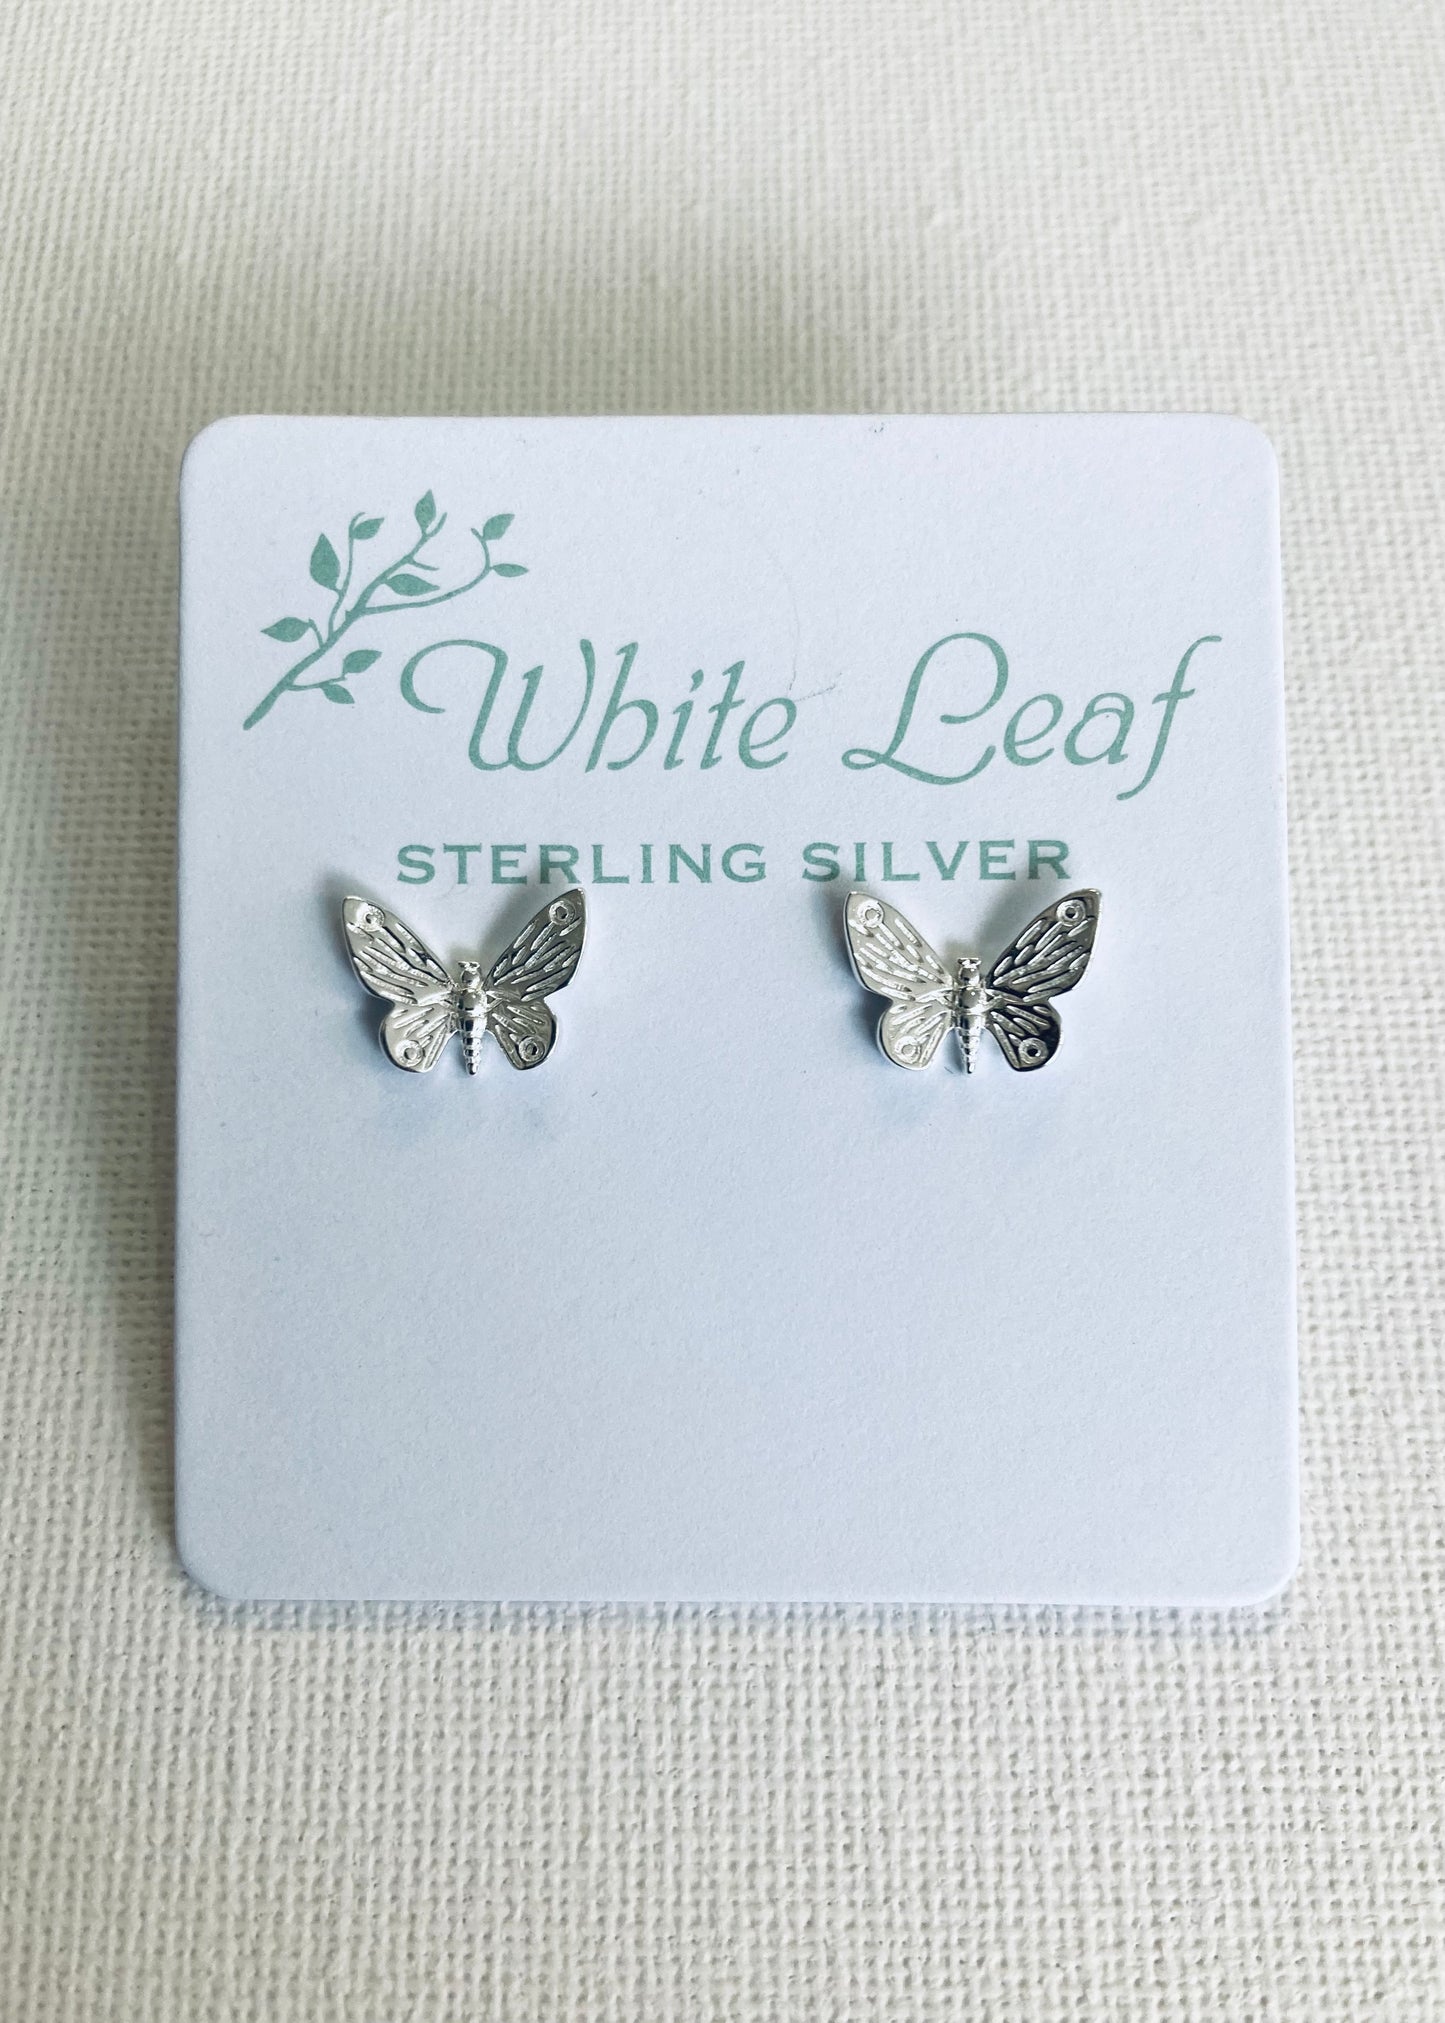 White Leaf - Etched Butterfly Sterling Silver Earrings*